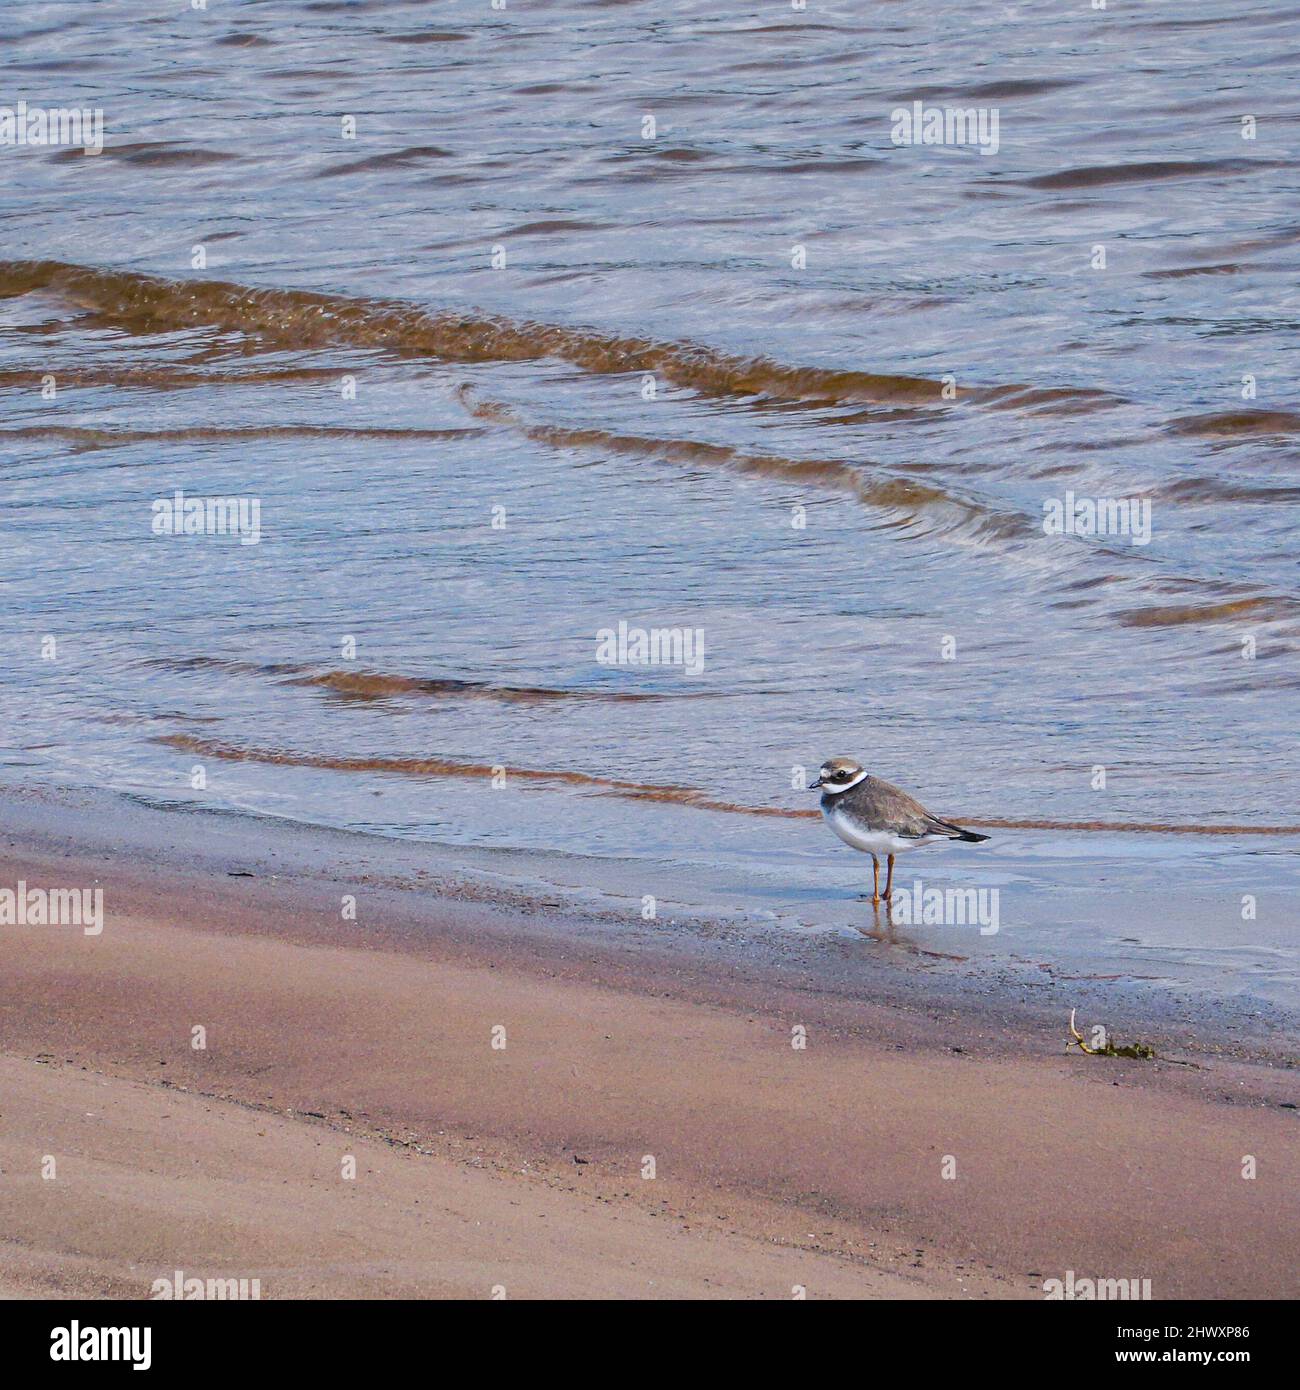 Small gray bird Big-billed plover on a sandy beach. Greater Sand Plover-Charadrius leschenaultii Stock Photo